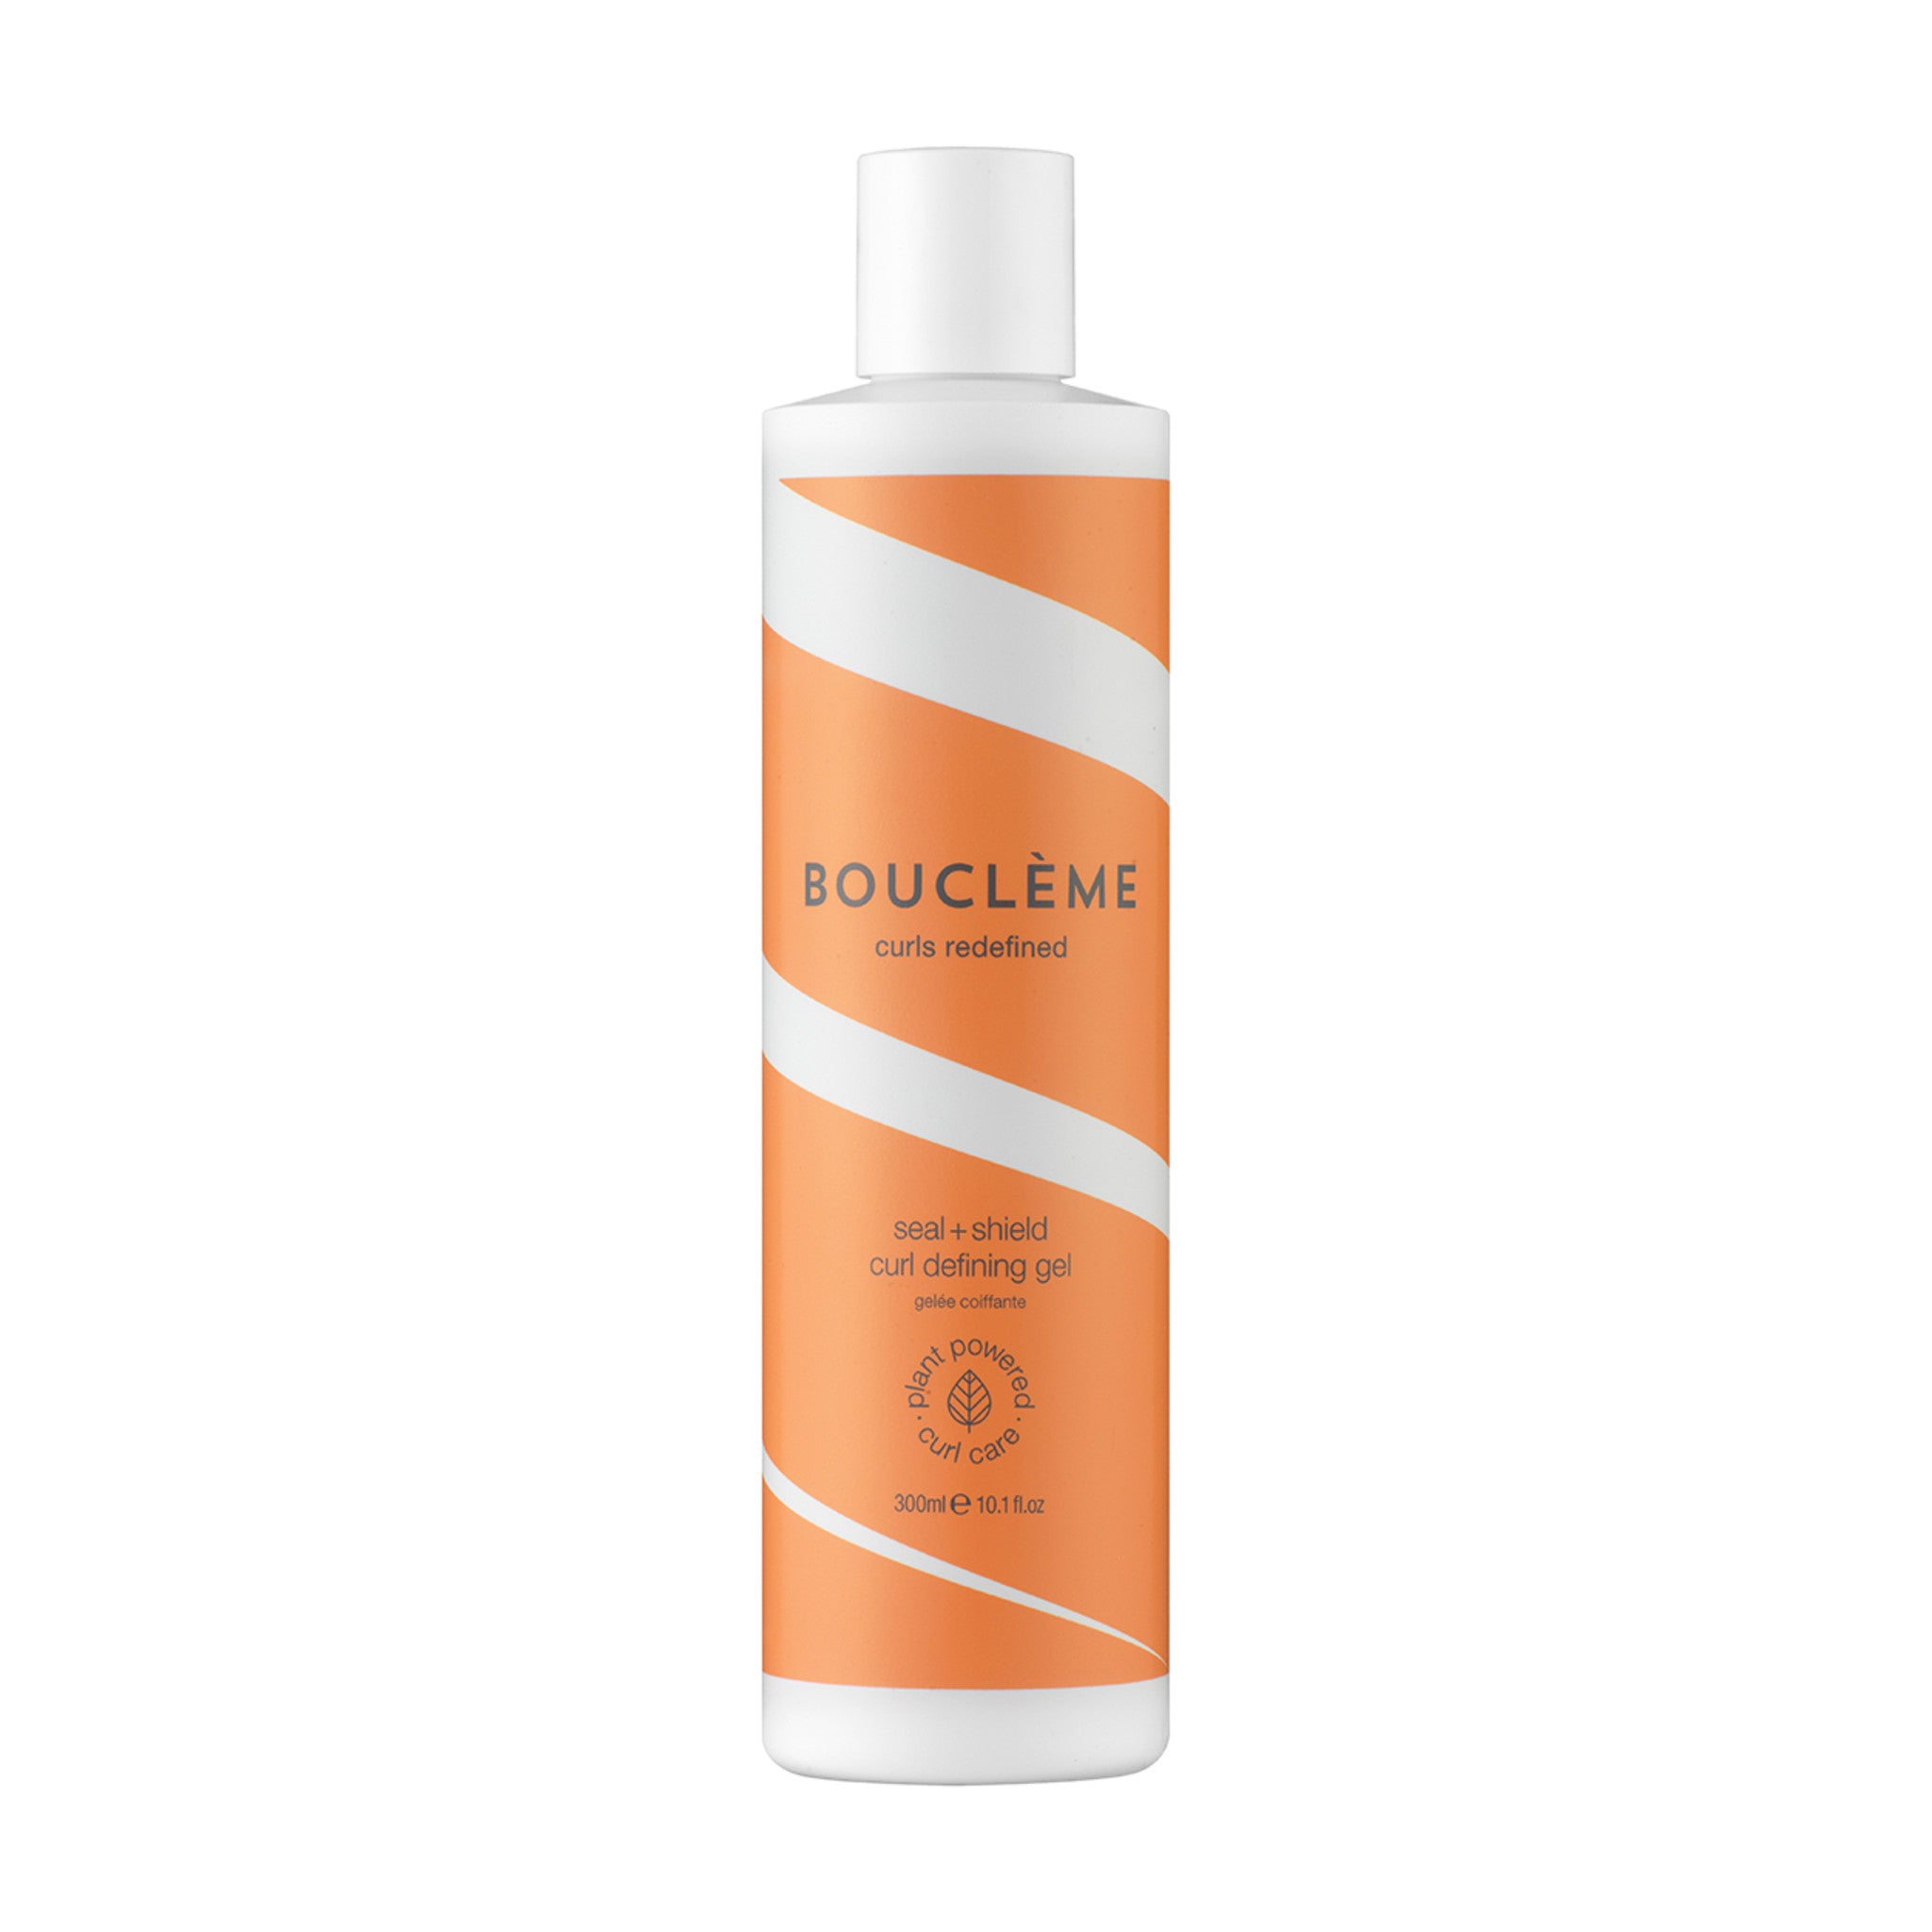 Bouclème Seal and Shield Styling Gel main image.